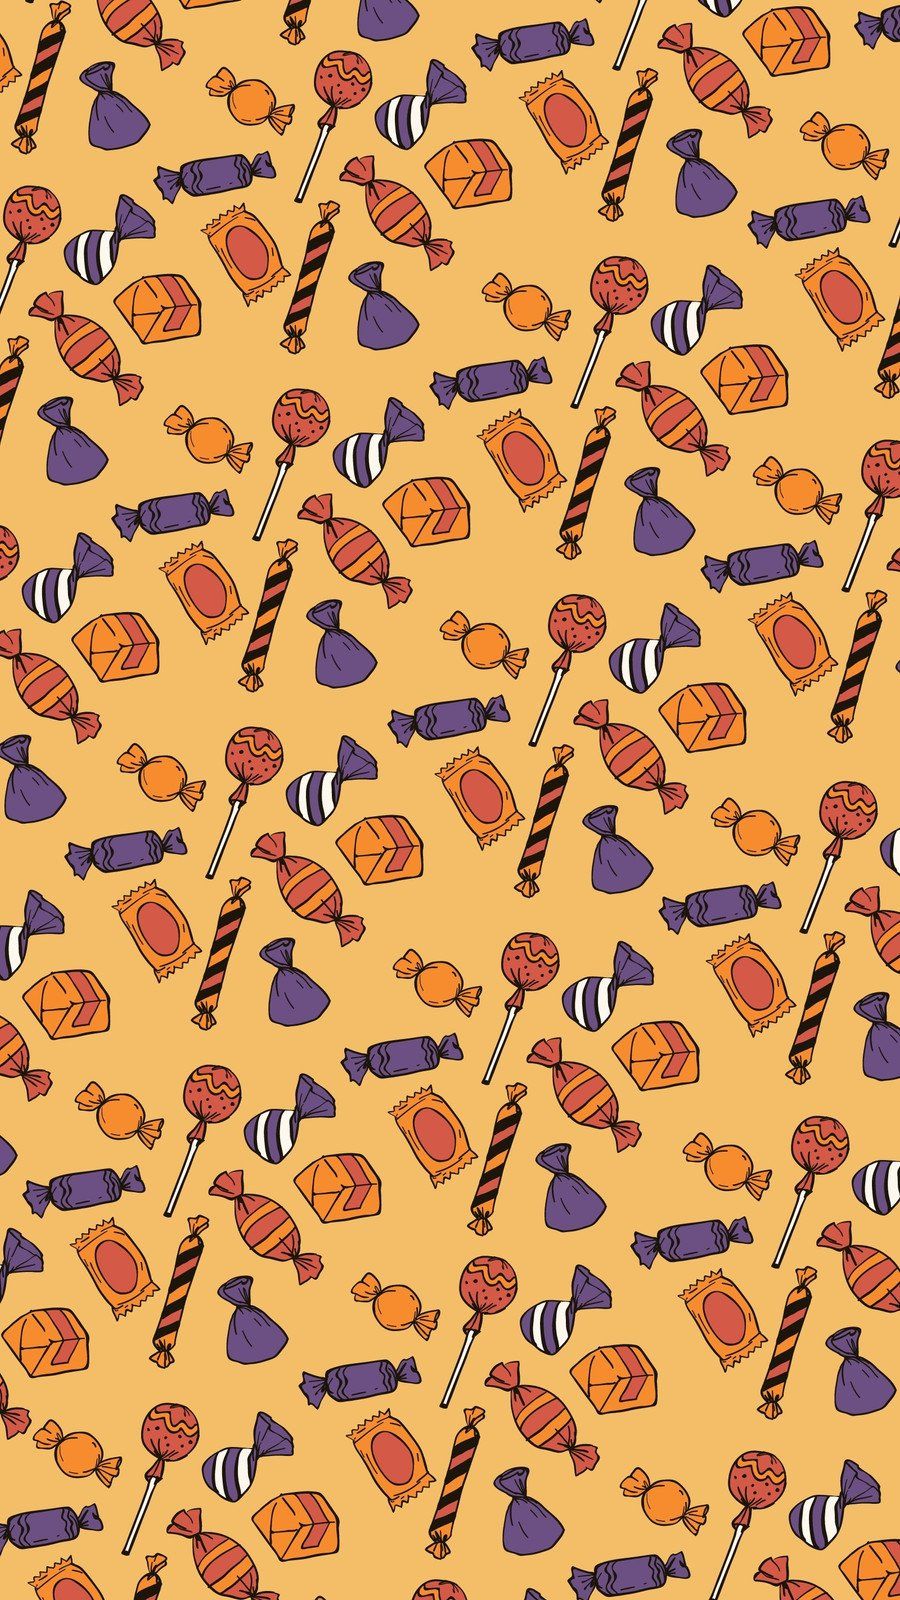 A repeating pattern of various Halloween candies on a yellow background - Pizza